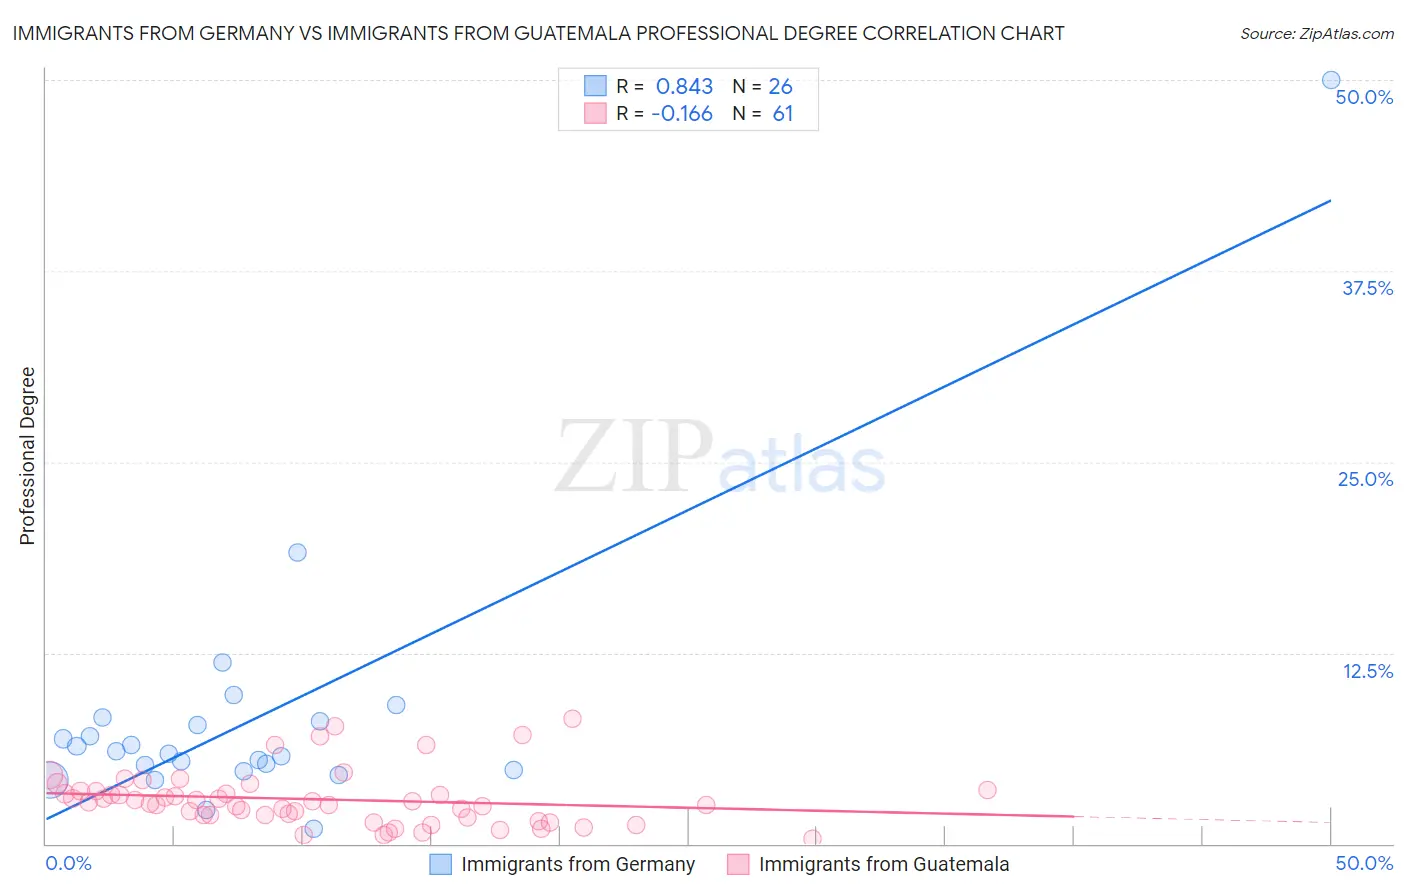 Immigrants from Germany vs Immigrants from Guatemala Professional Degree